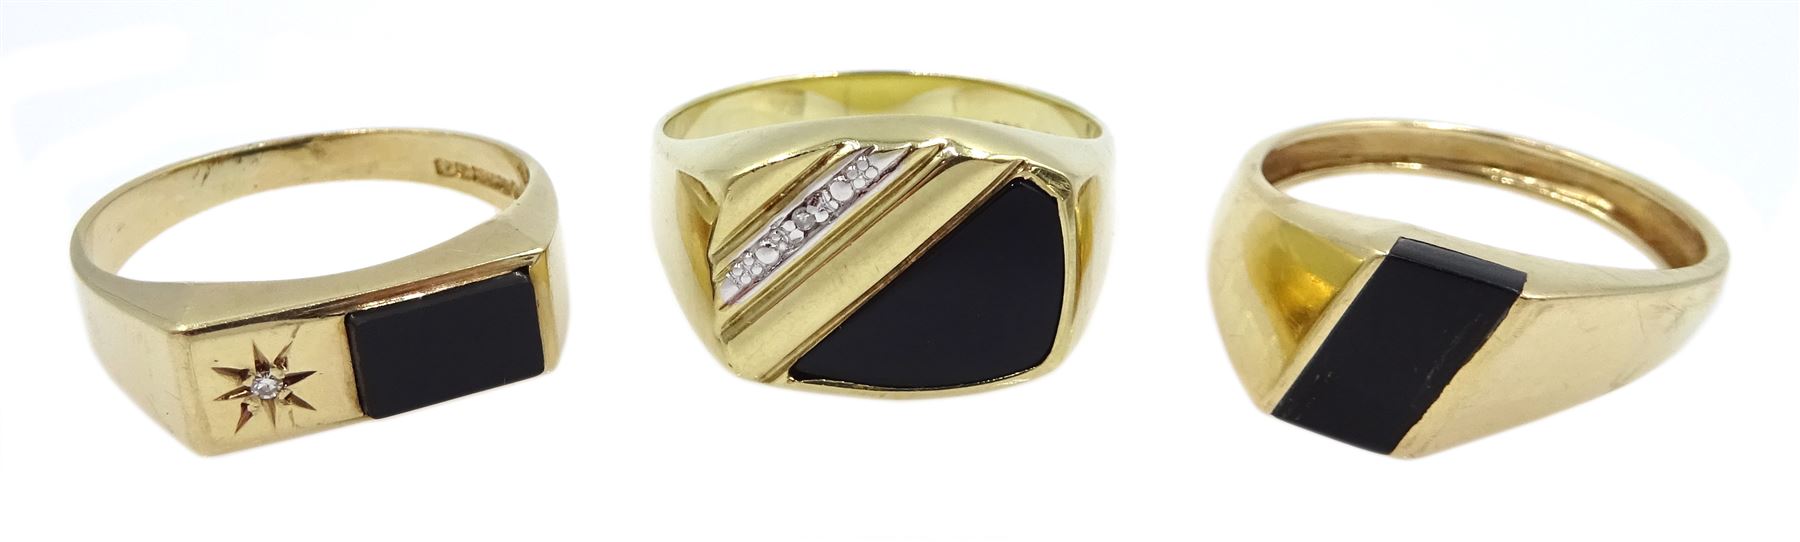 Two 9ct gold black onyx and diamond rings hallmarked and one 9ct gold black onyx ring tested